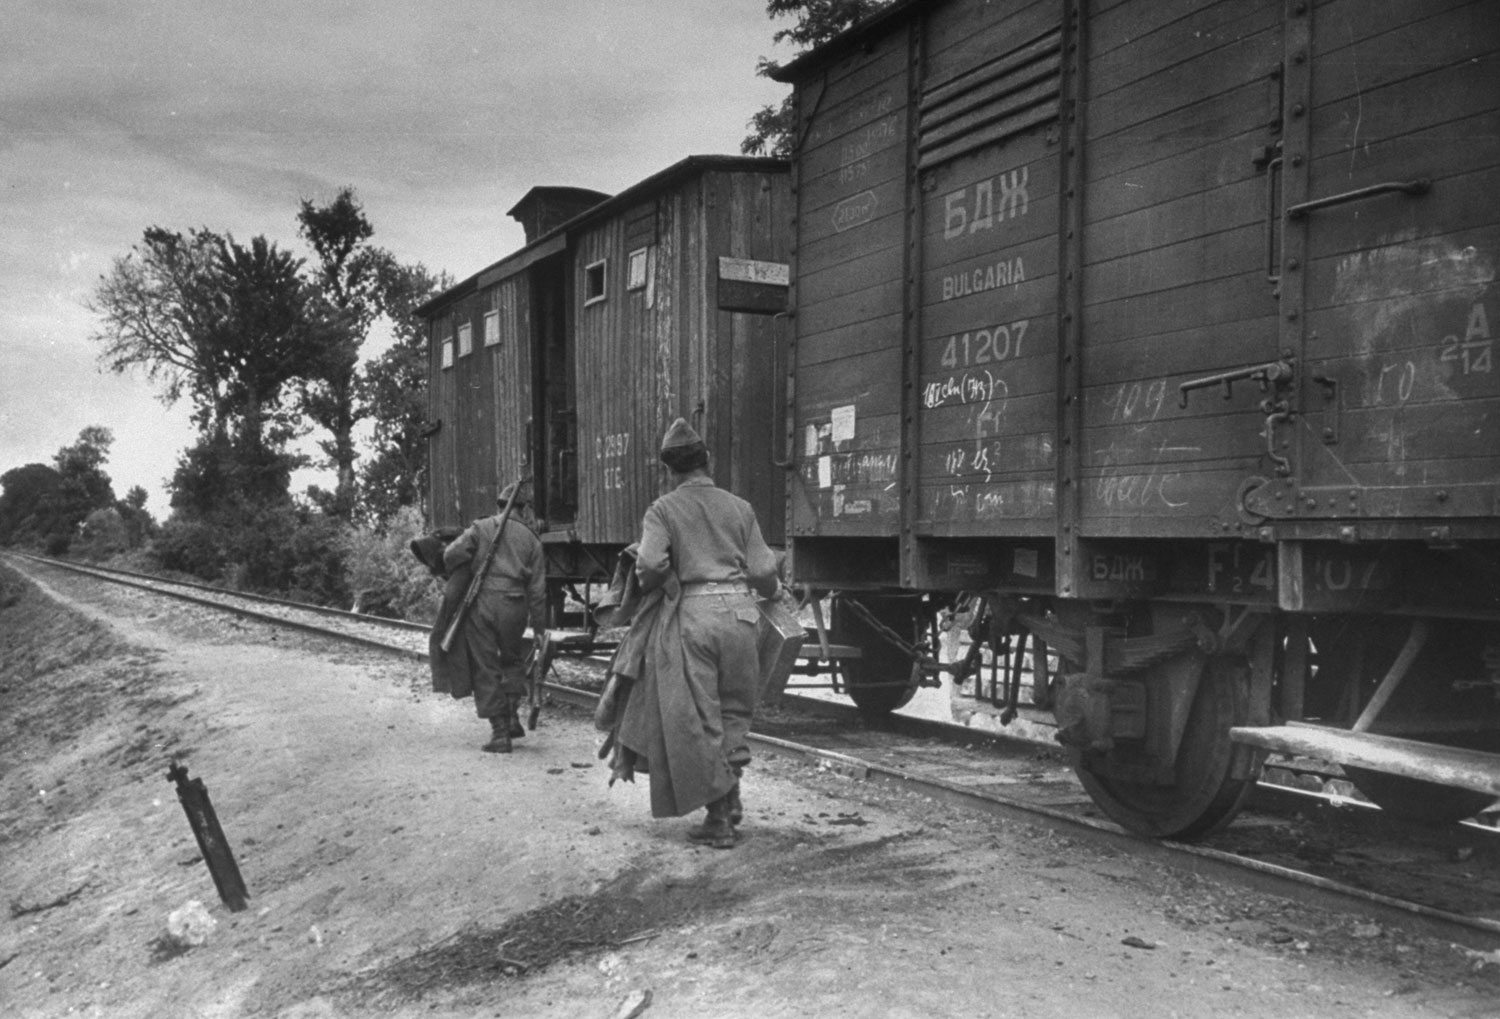 Greek soldiers board boxcars at Svilengrad to guard train against Communist marauders who sneak across border from Bulgaria to join Red guerillas in Greece.